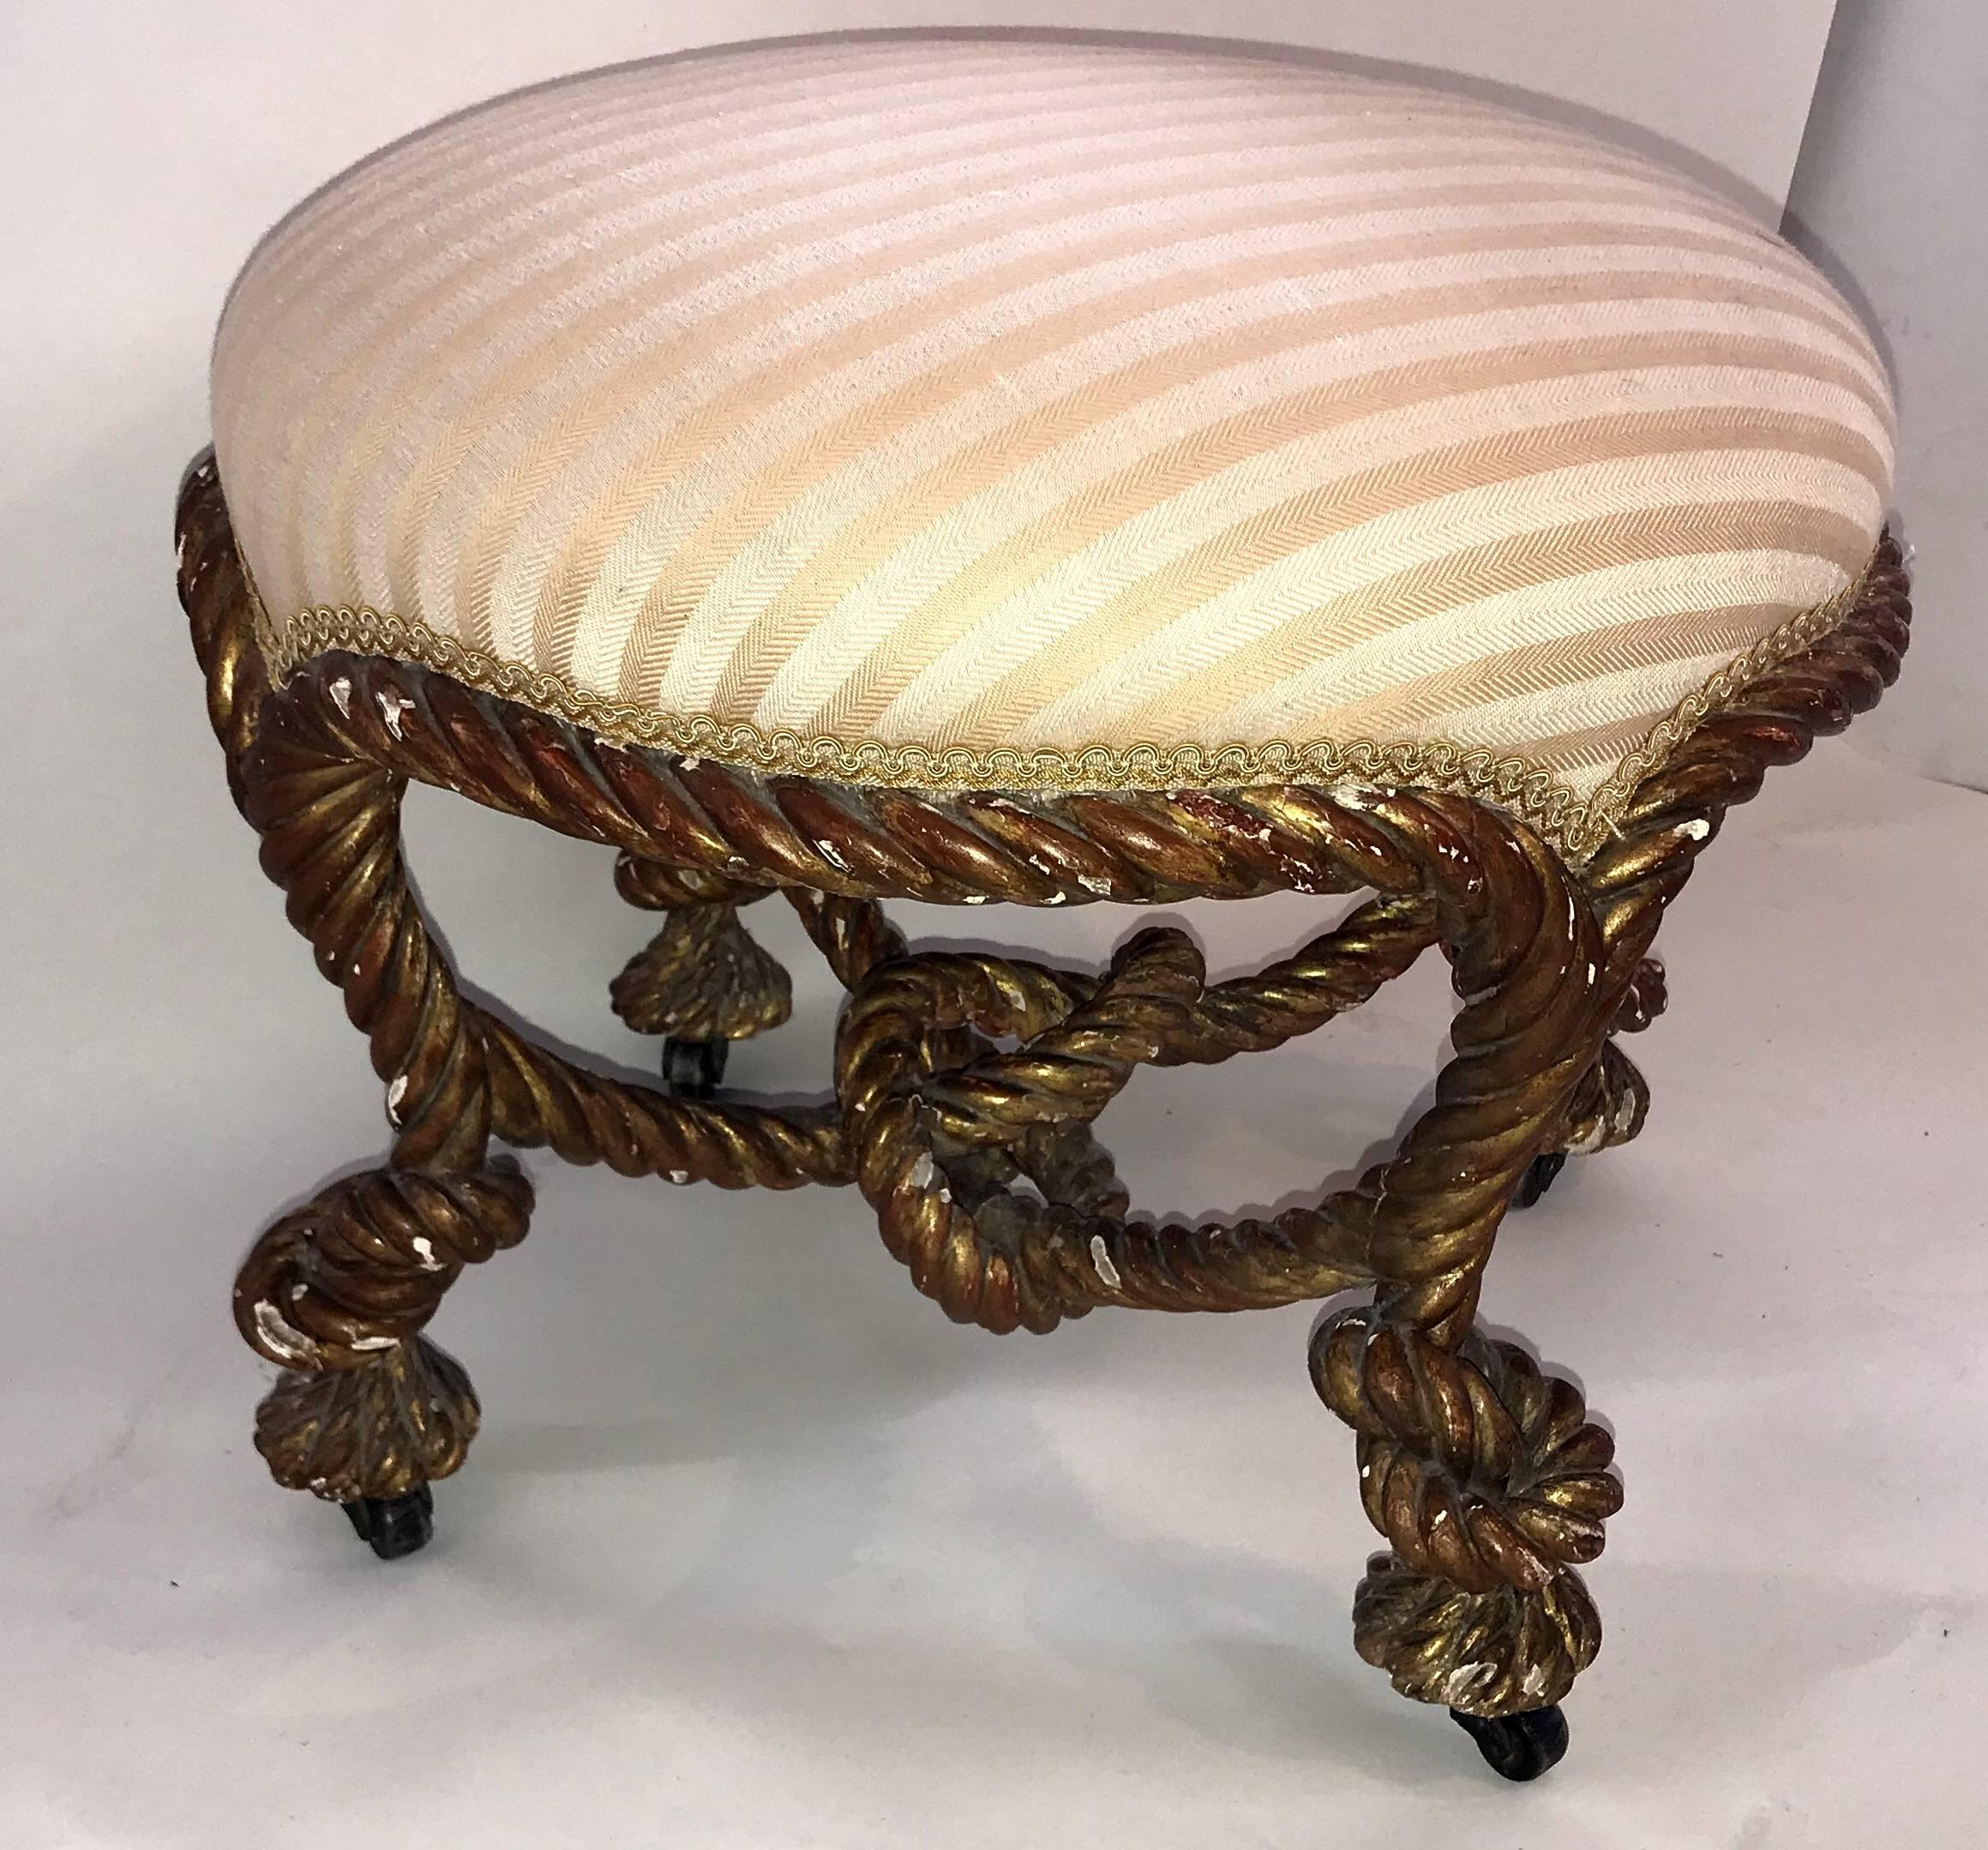 Wonderful French Giltwood Knotted Rope Round Ottoman Tabouret Silk Upholstery In Good Condition For Sale In Roslyn, NY